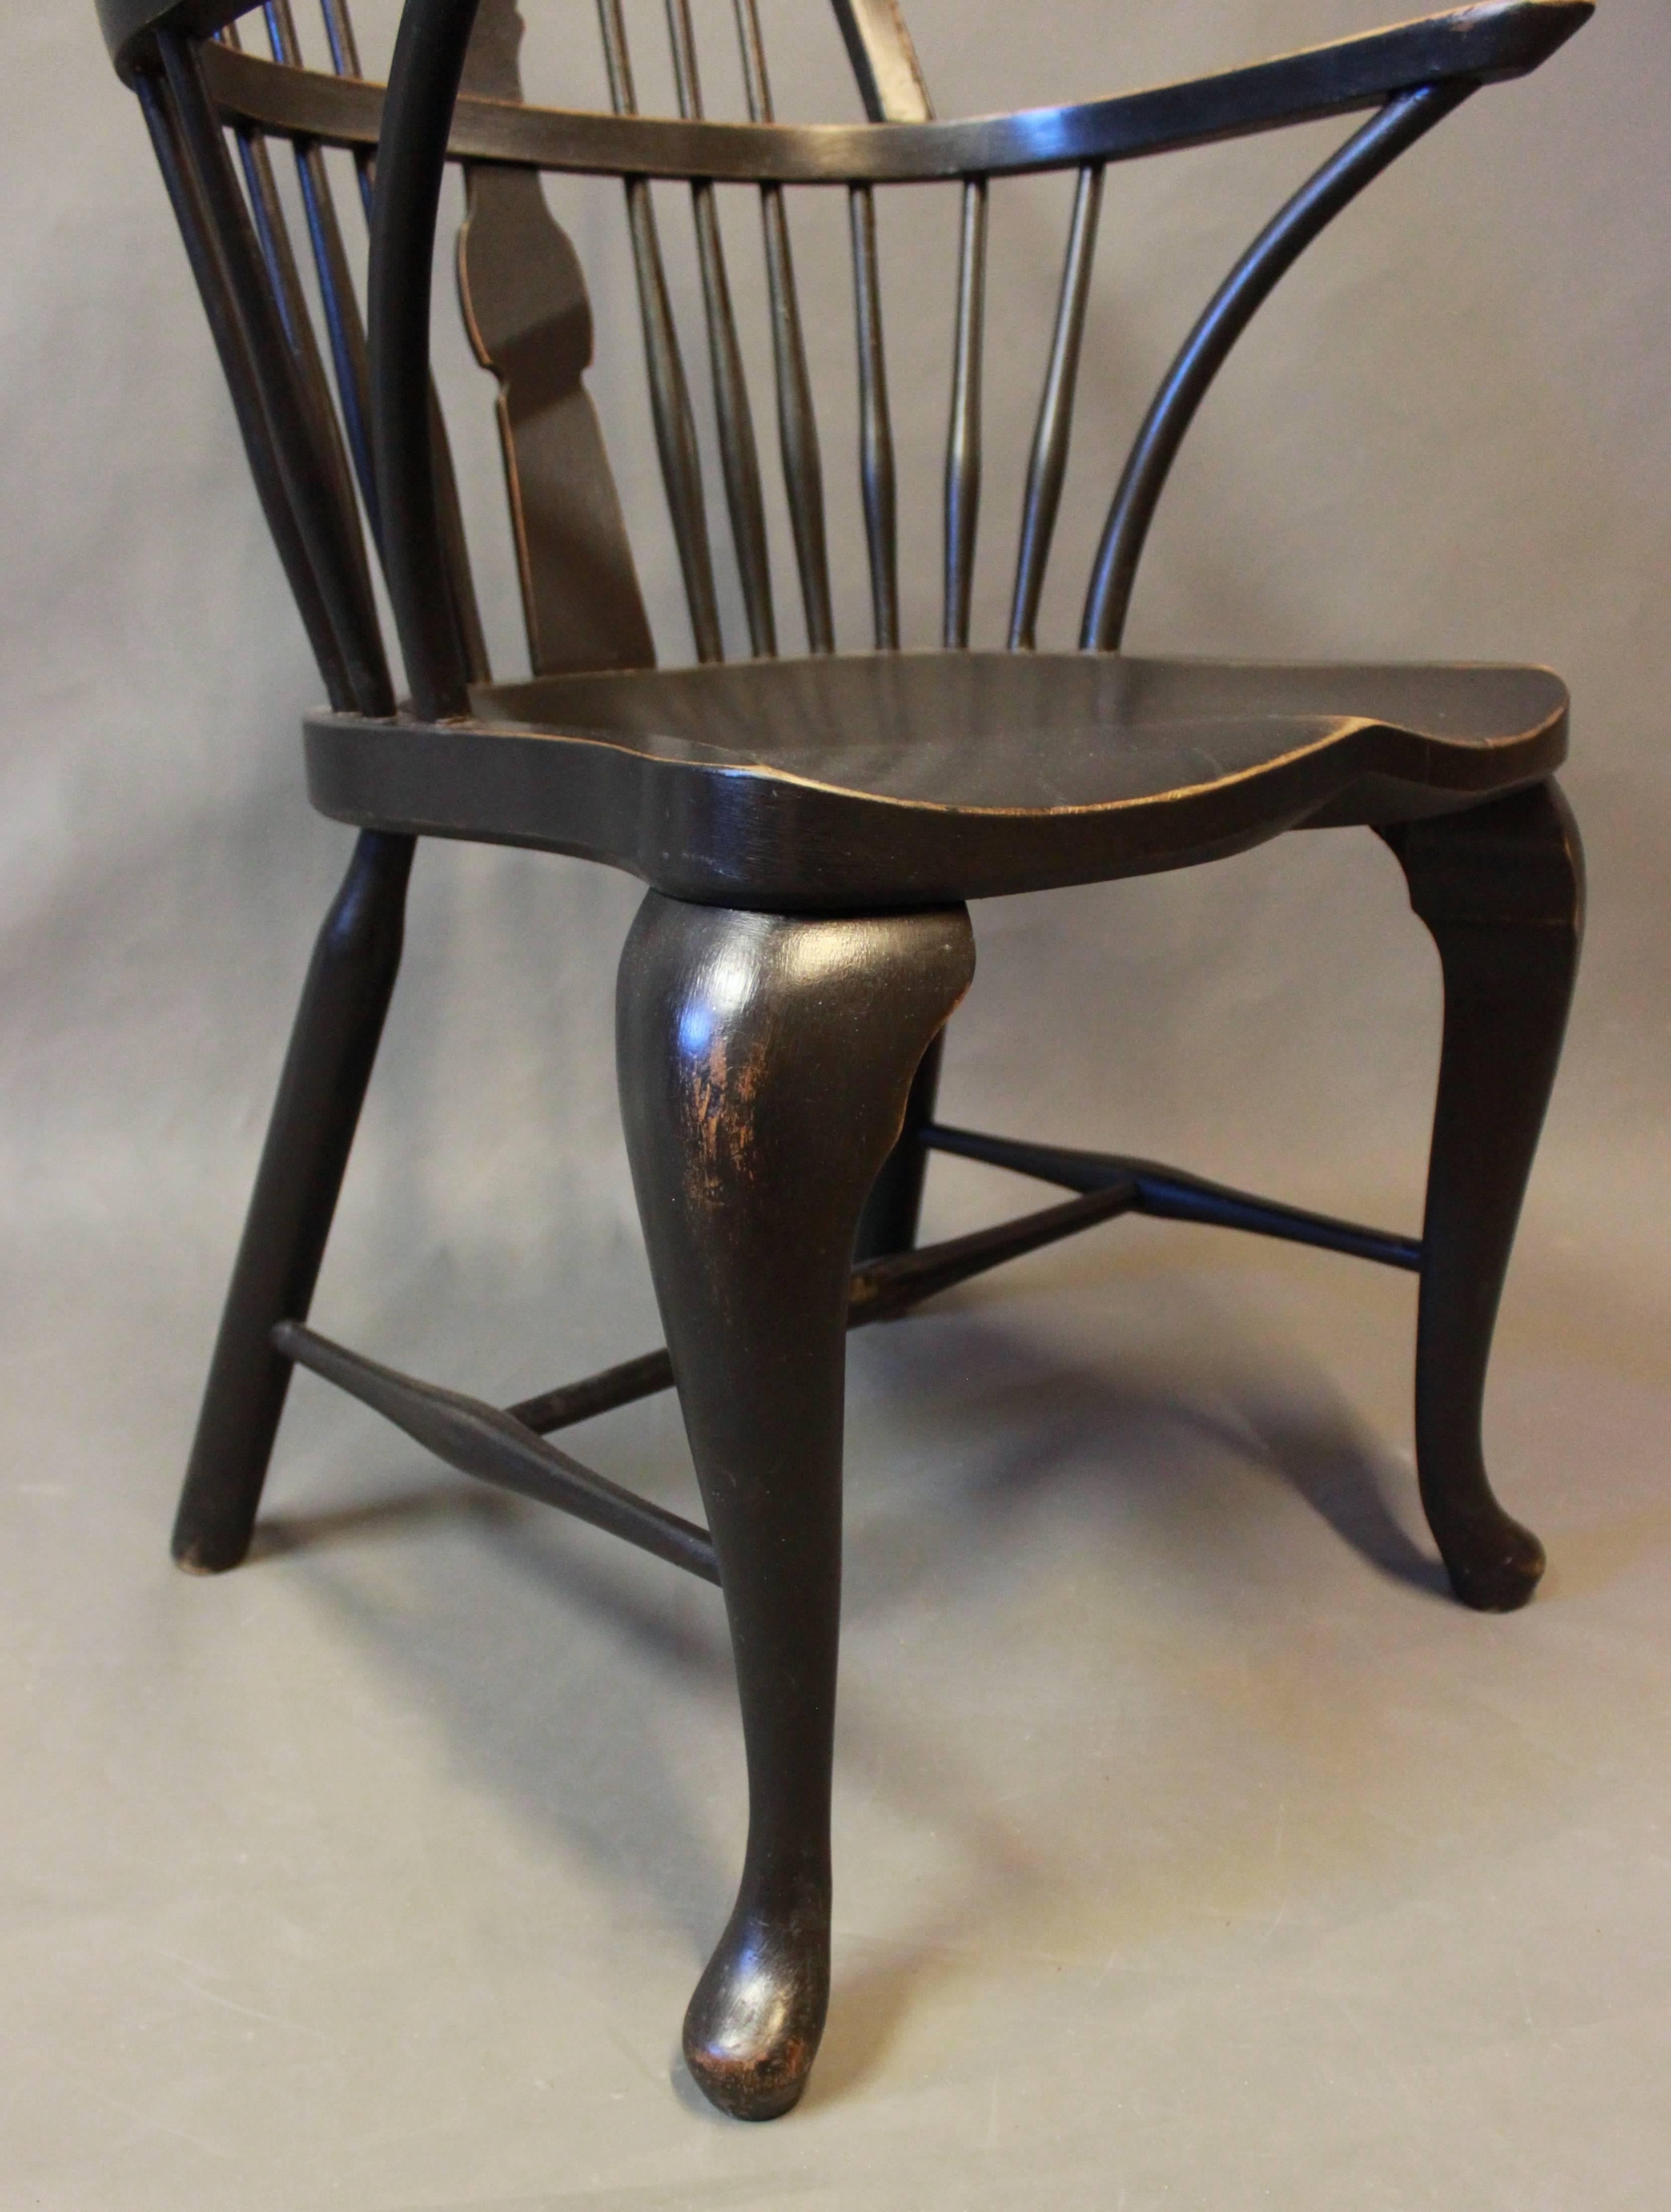 Other Pair of Black Painted Windsor Armchairs in Wood from the 1880s